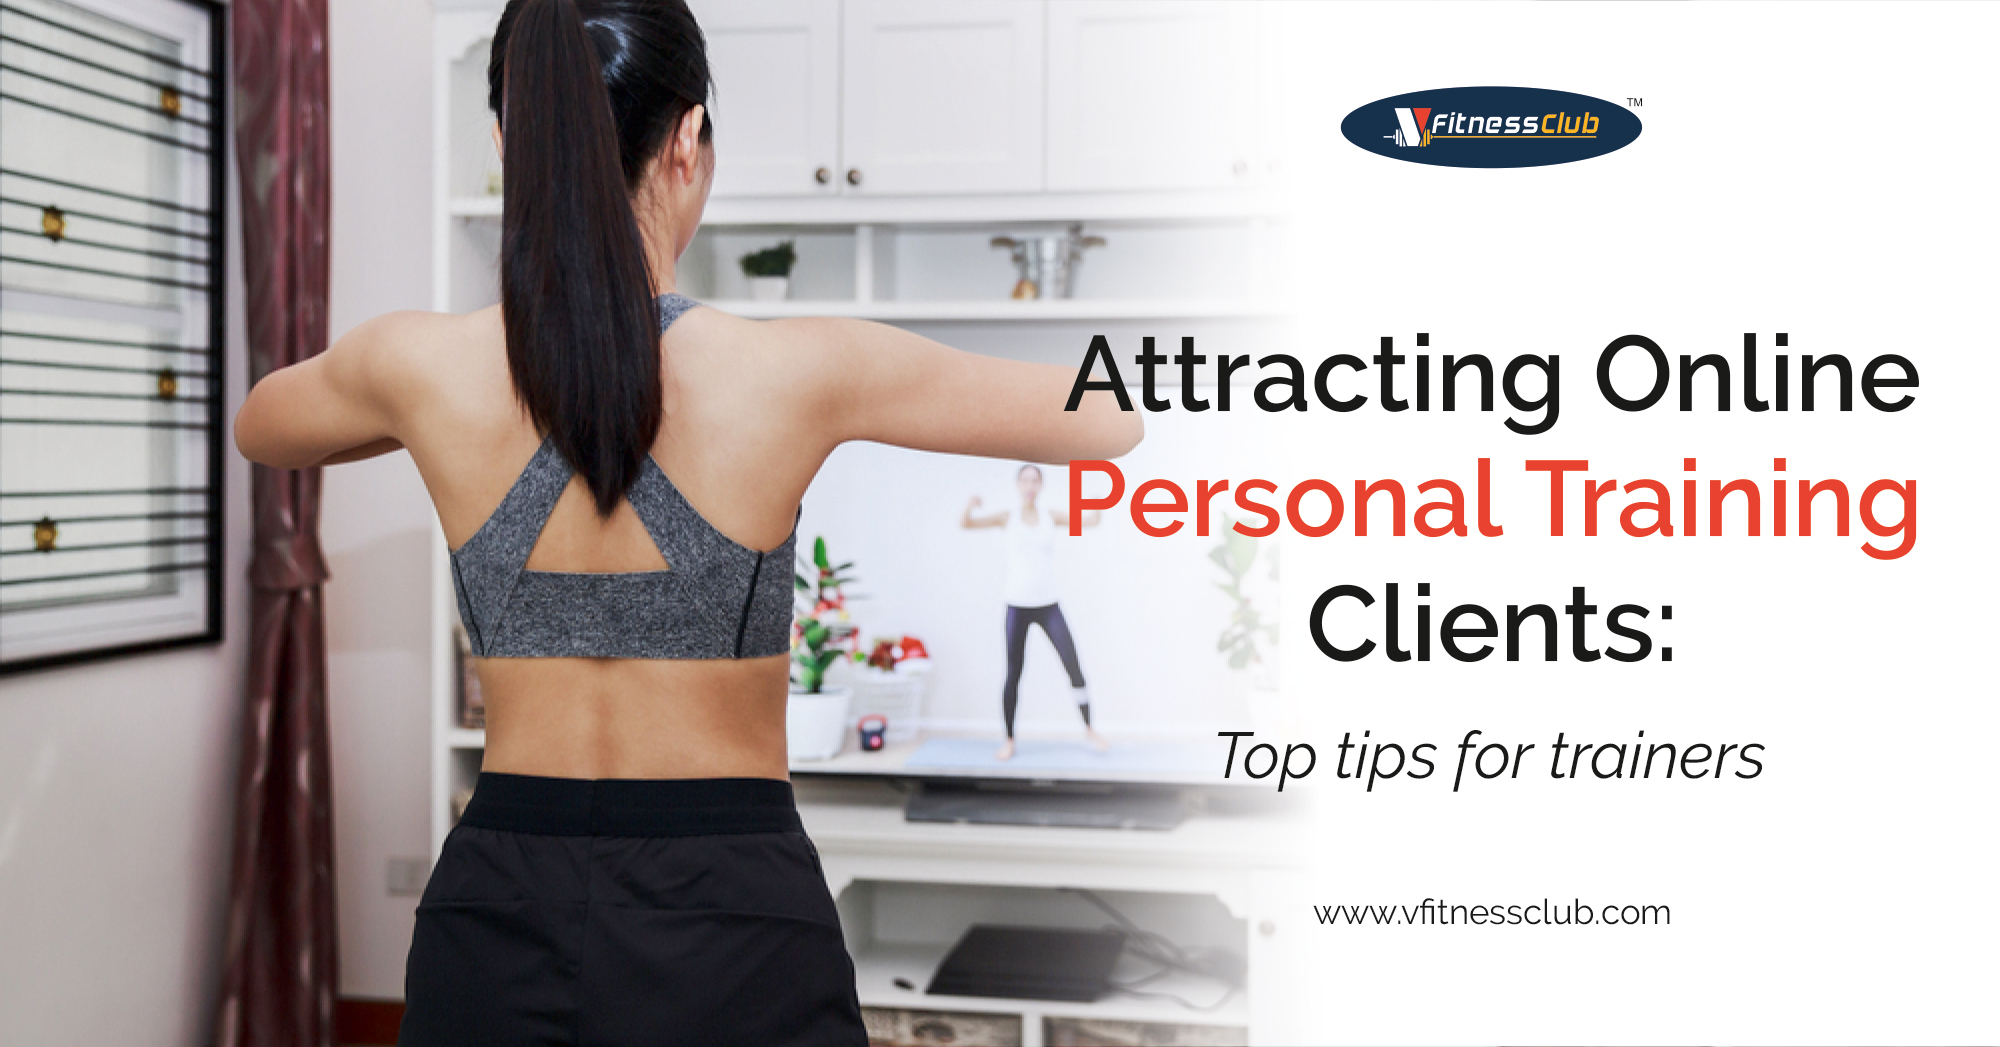 Attracting Online Personal Training Clients: Top tips for trainers